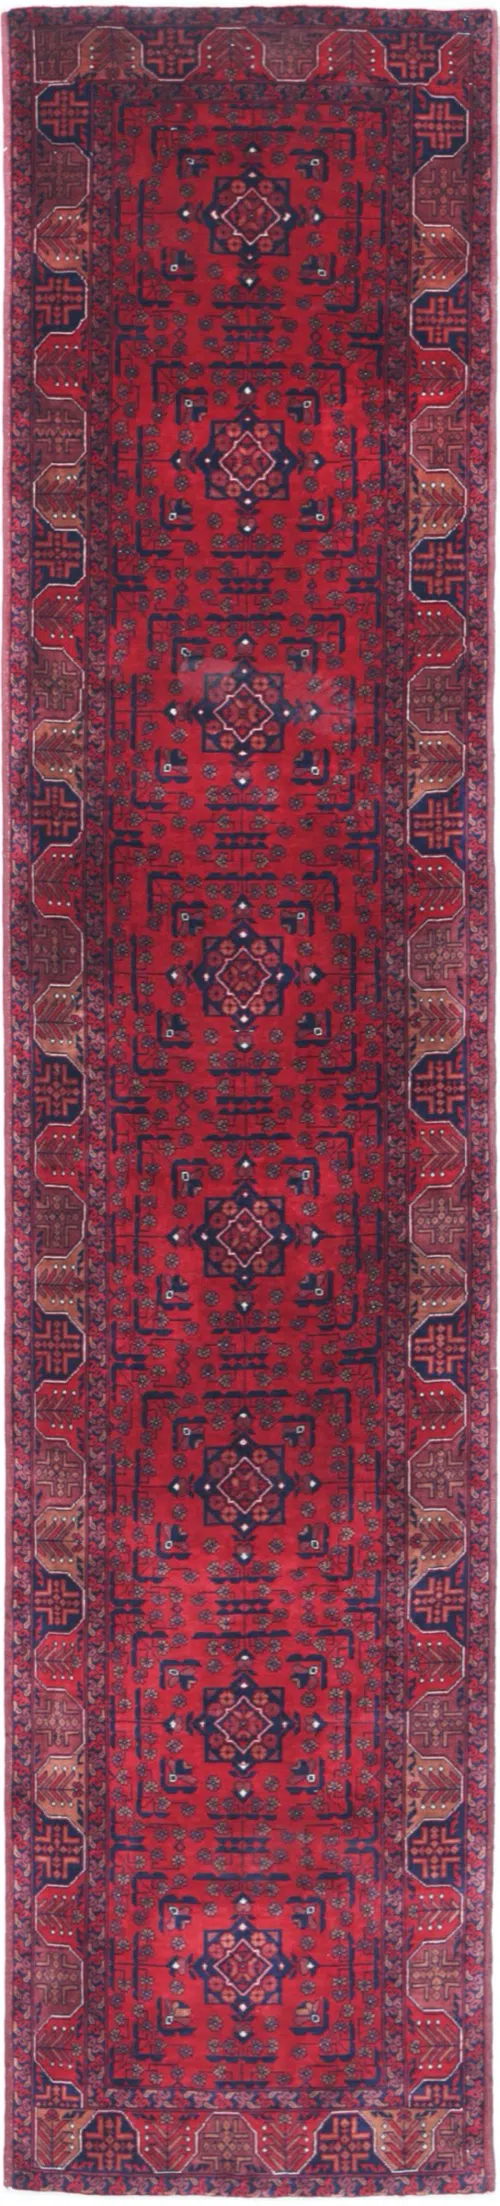 360190 eCarpet Gallery Large Area Rug for Living Room Finest Khal Mohammadi Bordered Red Rug 6'7 x 9'10 Hand-Knotted Wool Rug Bedroom